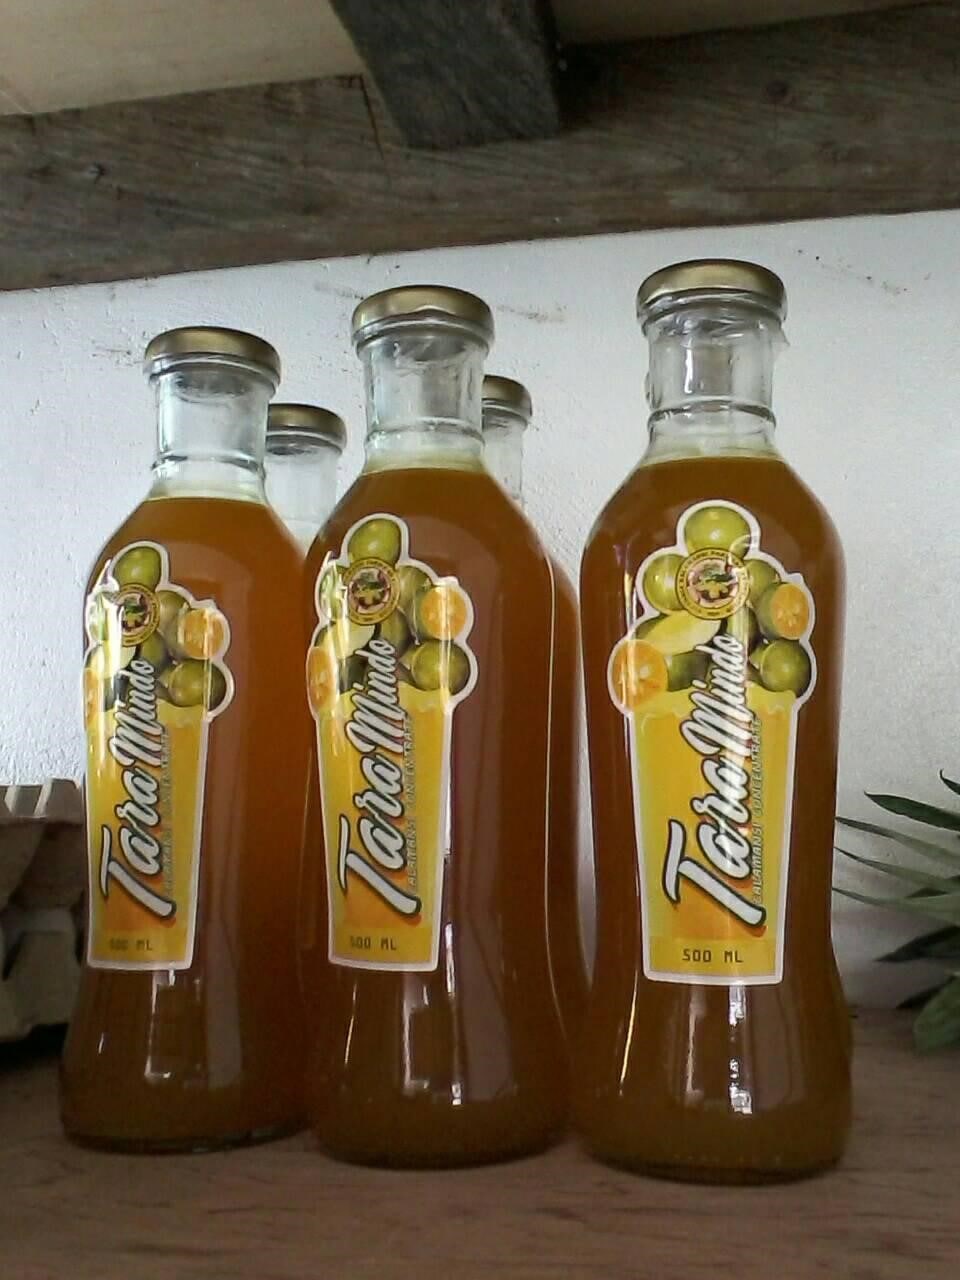 TaraMindo calamansi concentrate, a product of the Victoria Kalamansi Farmers Federation, one of the project’s partner beneficiary in Victoria, Oriental Mindoro.